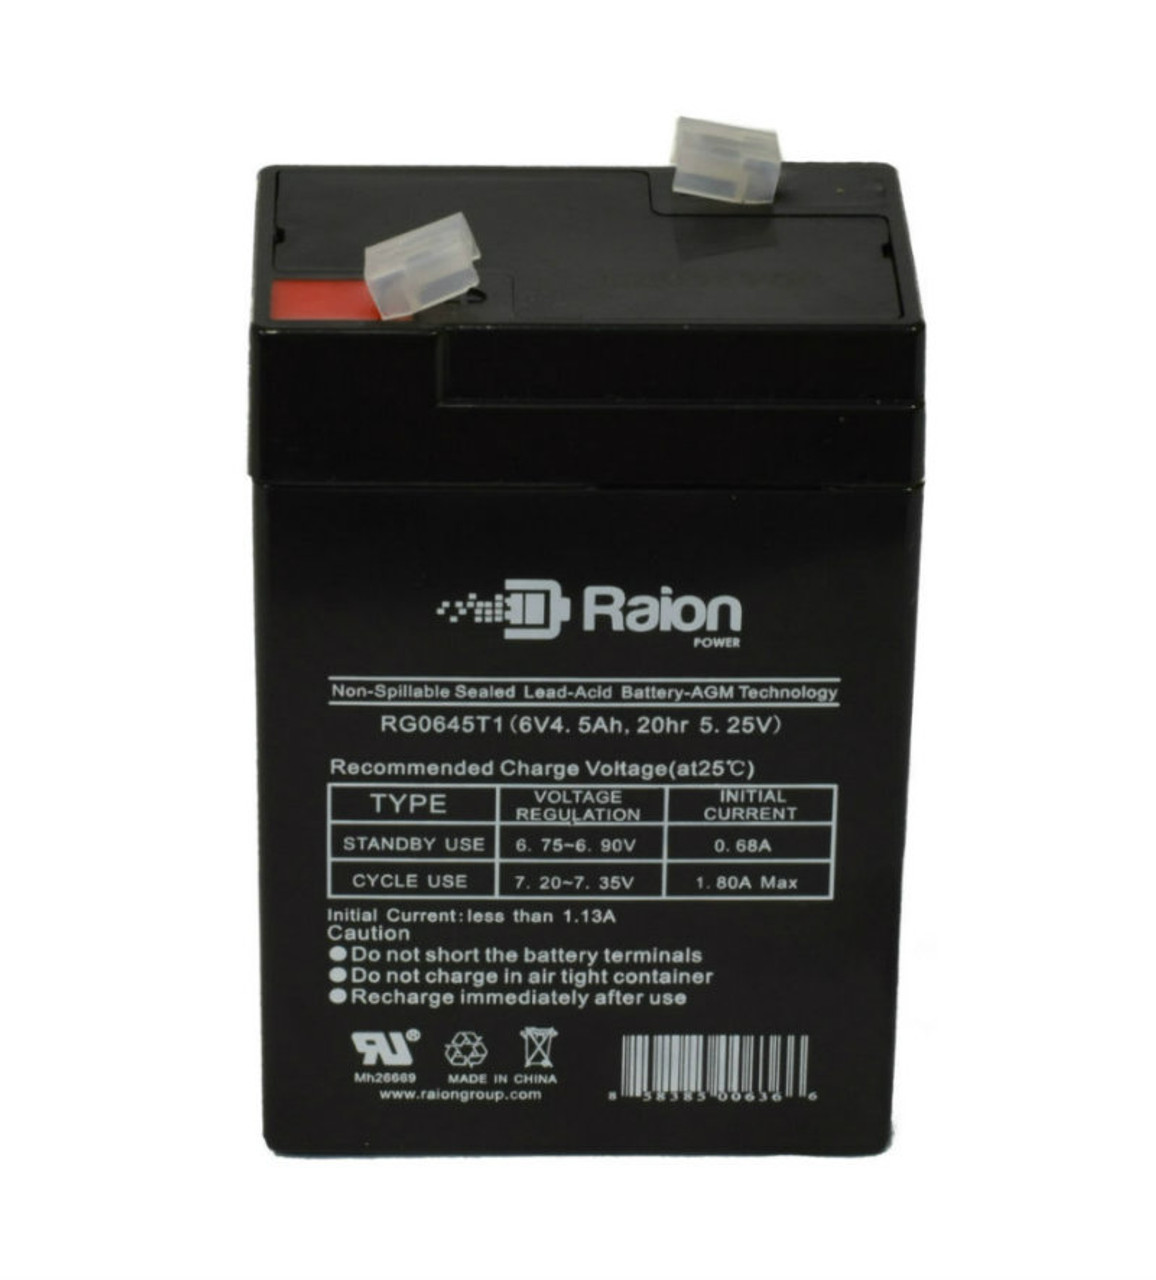 Raion Power RG0645T1 Replacement Battery Cartridge for MOJO Hawk